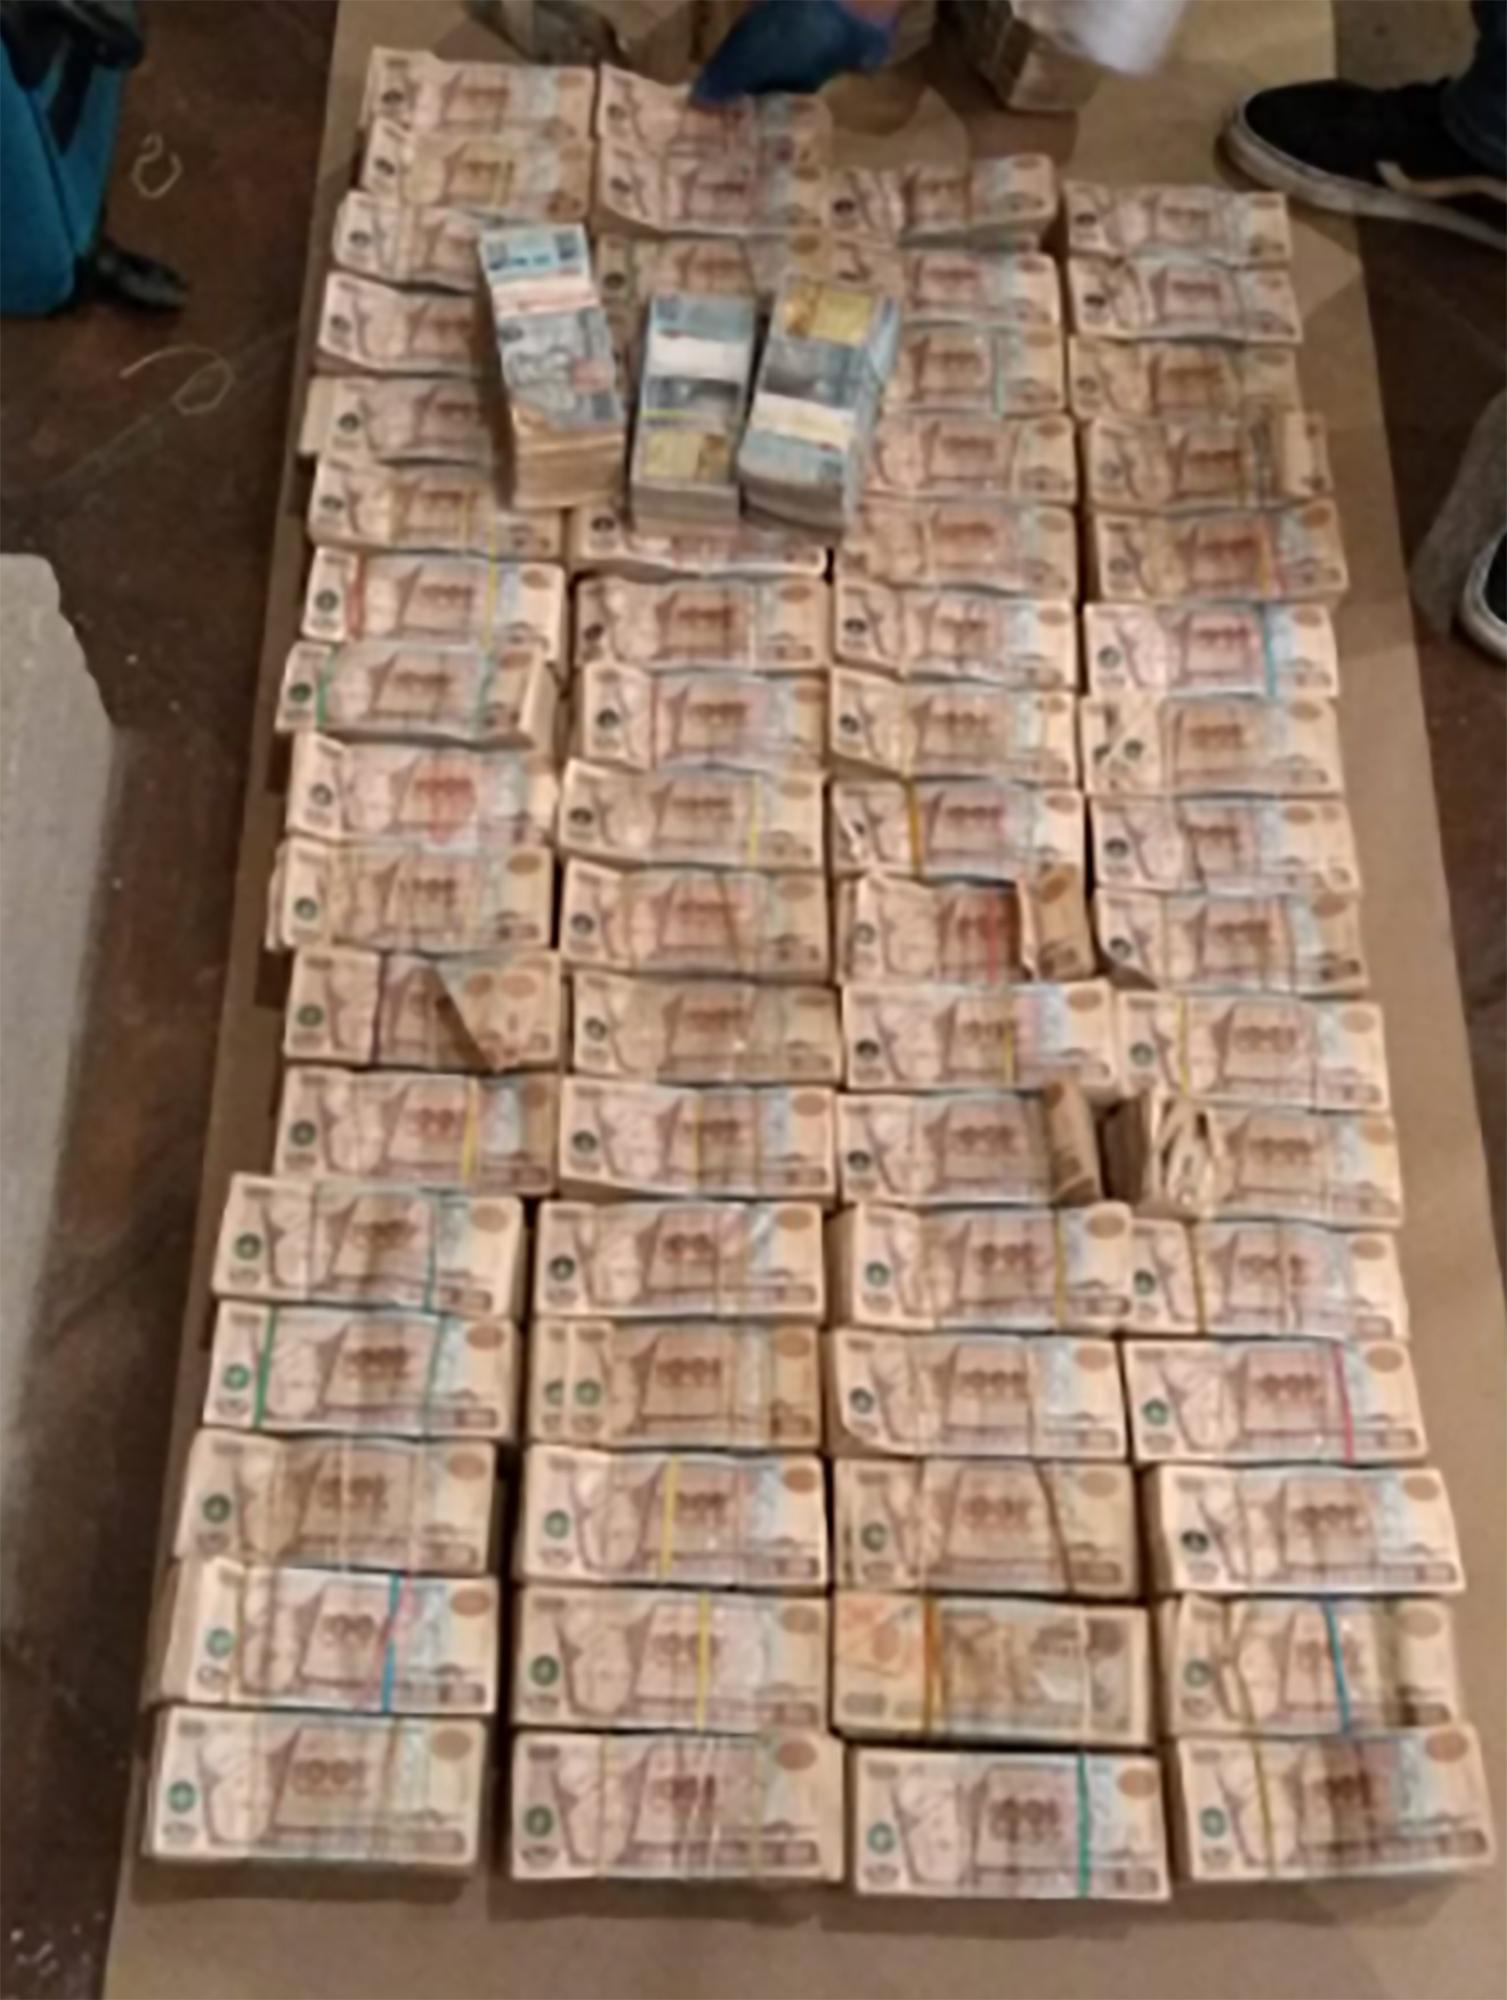 Roughly $16 million dollars was found in a home linked to José Benito, former Minister of Communications, Infrastructure and Housing under former President Jimmy Morales. Photo from the Guatemalan Attorney General